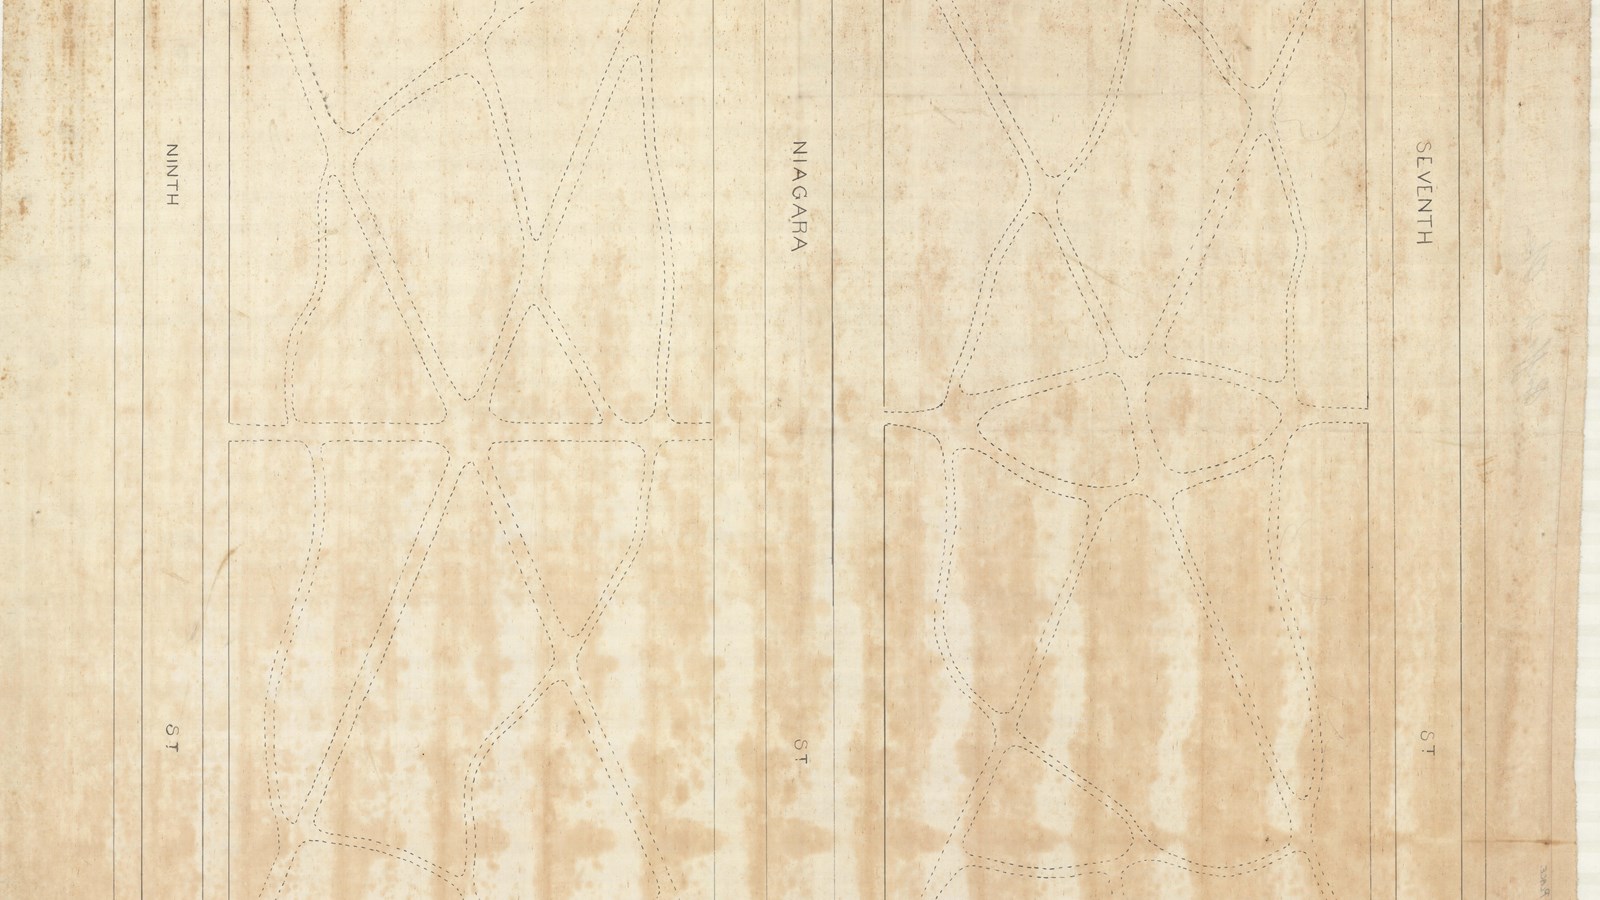 Pencil plan of two rectangular parks separated by street with curving paths through them